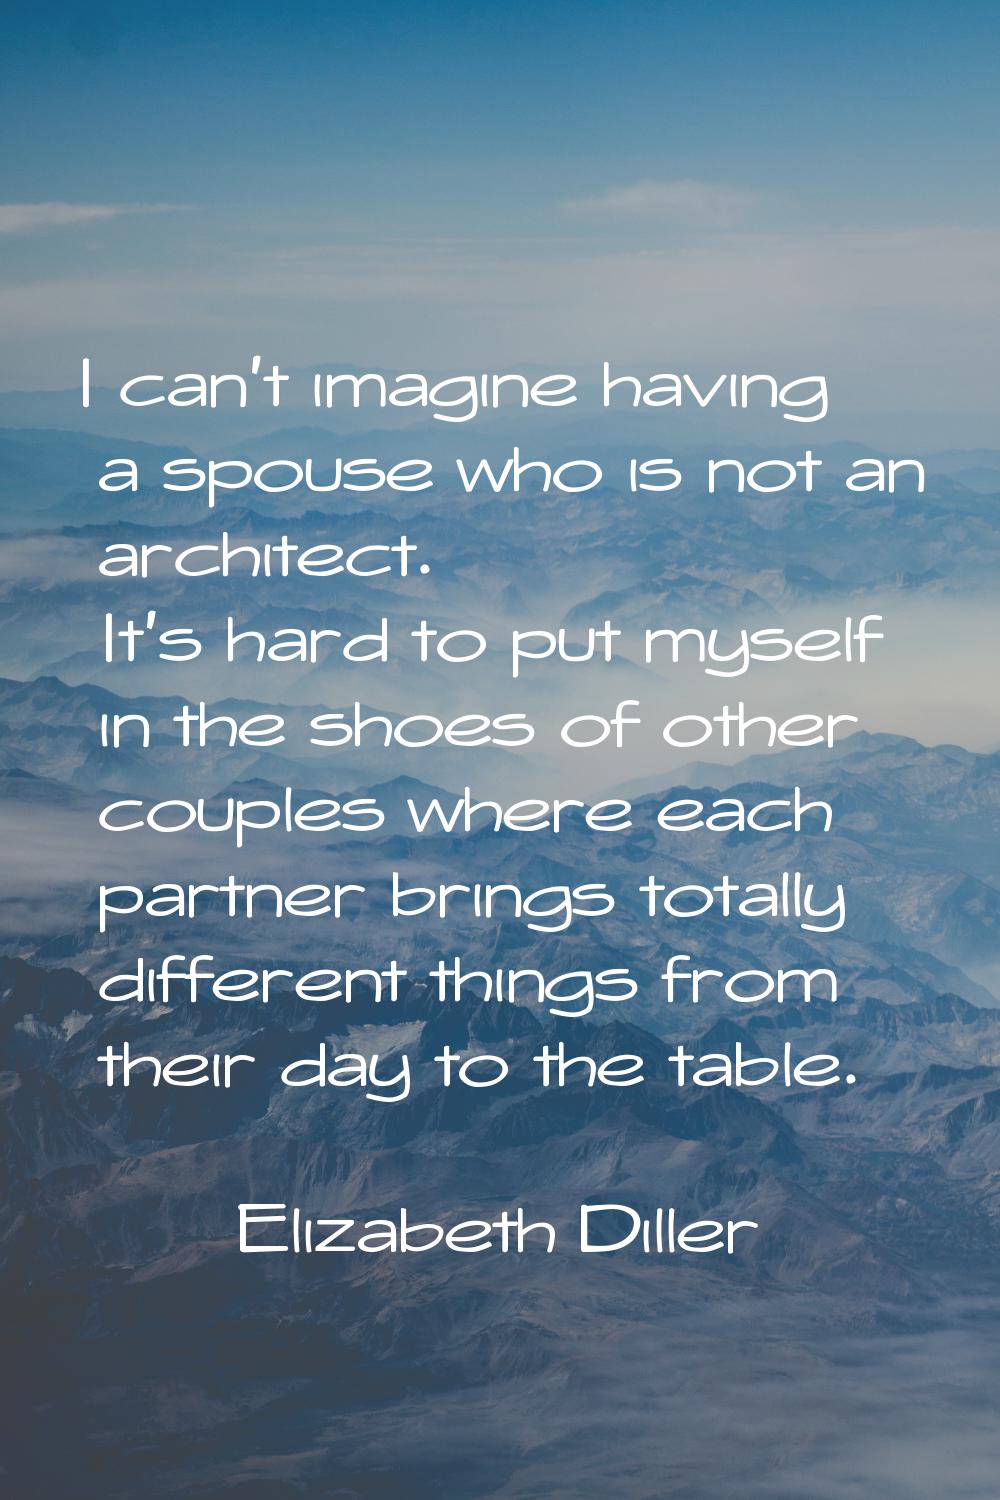 I can't imagine having a spouse who is not an architect. It's hard to put myself in the shoes of ot